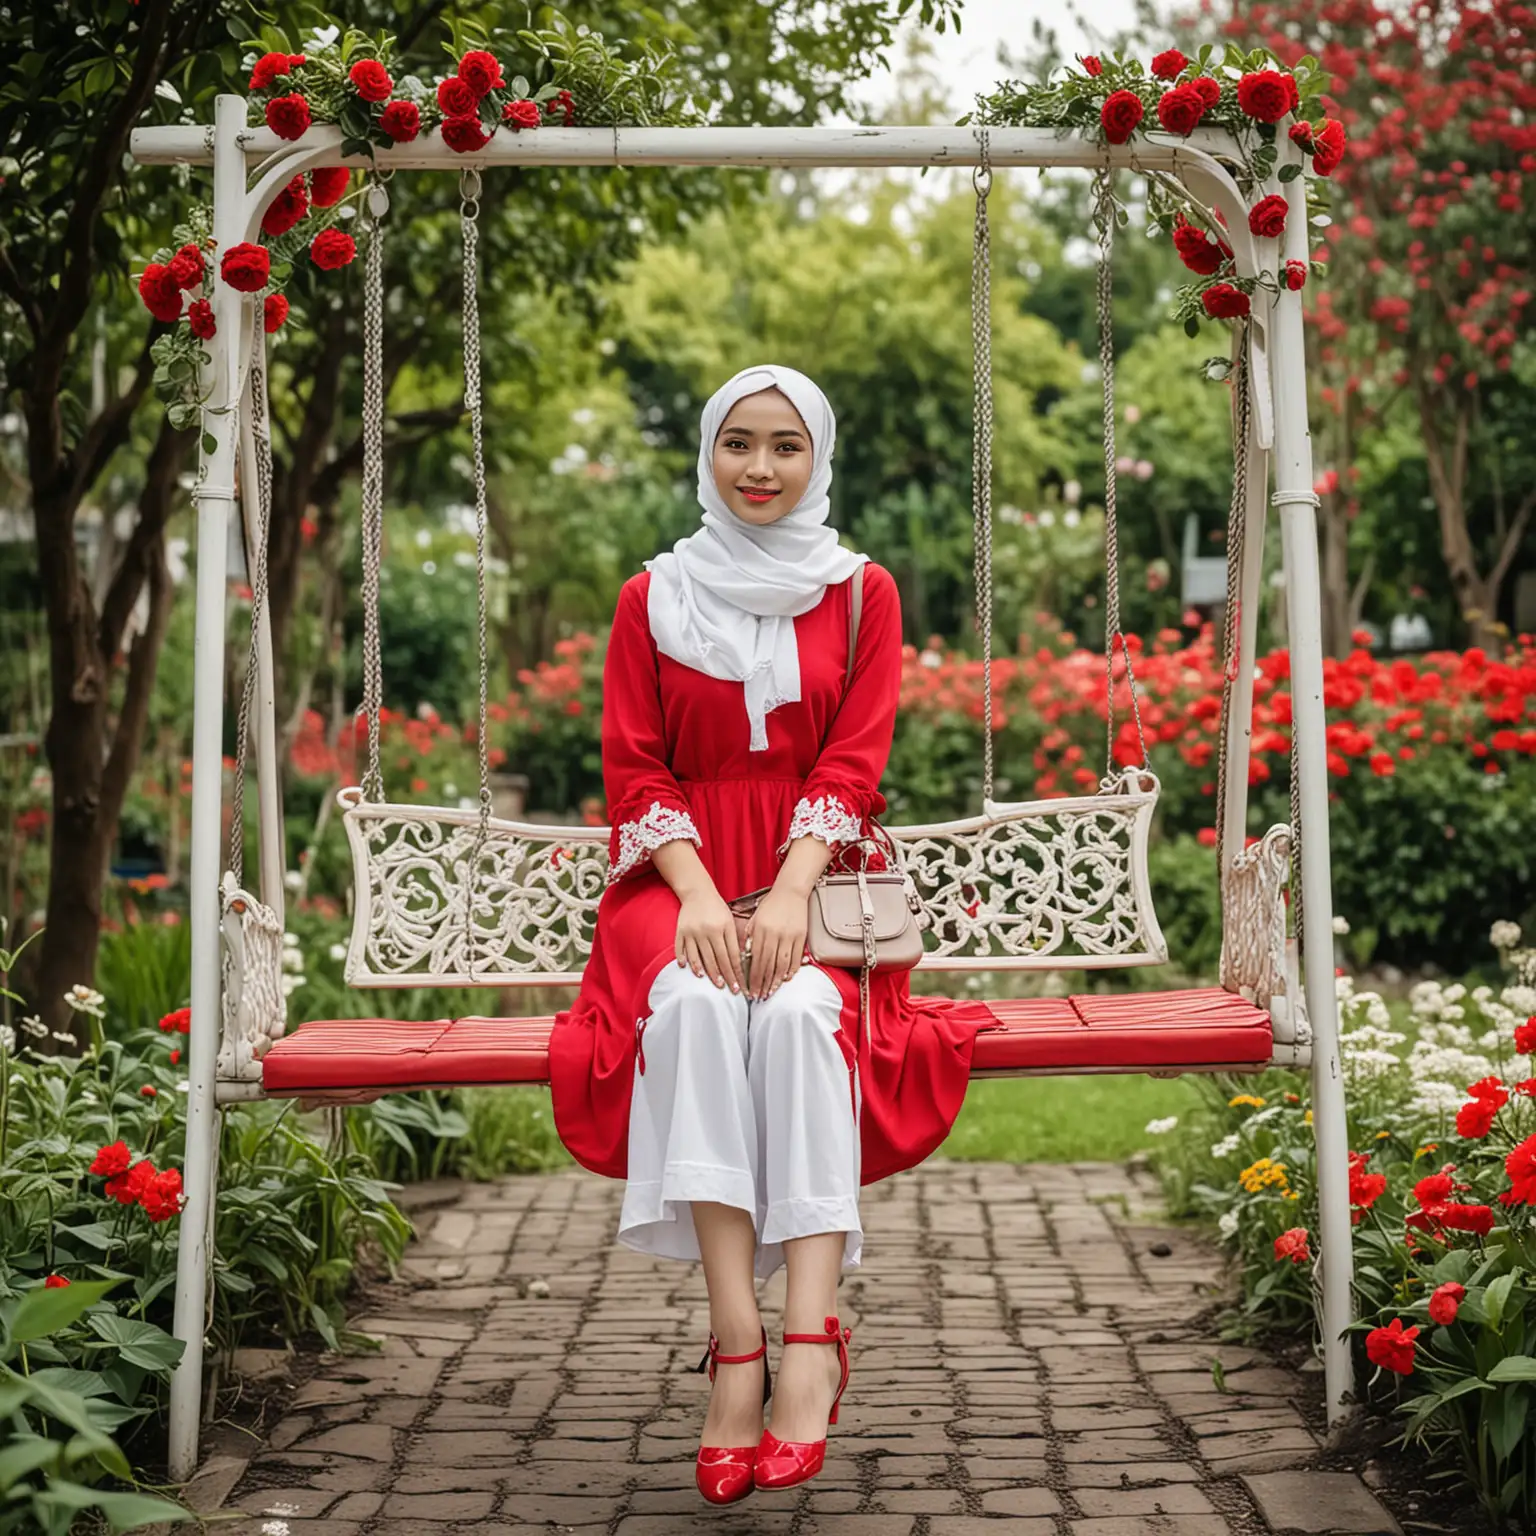 Indonesian Woman in White Hijab Relaxing on Garden Swing